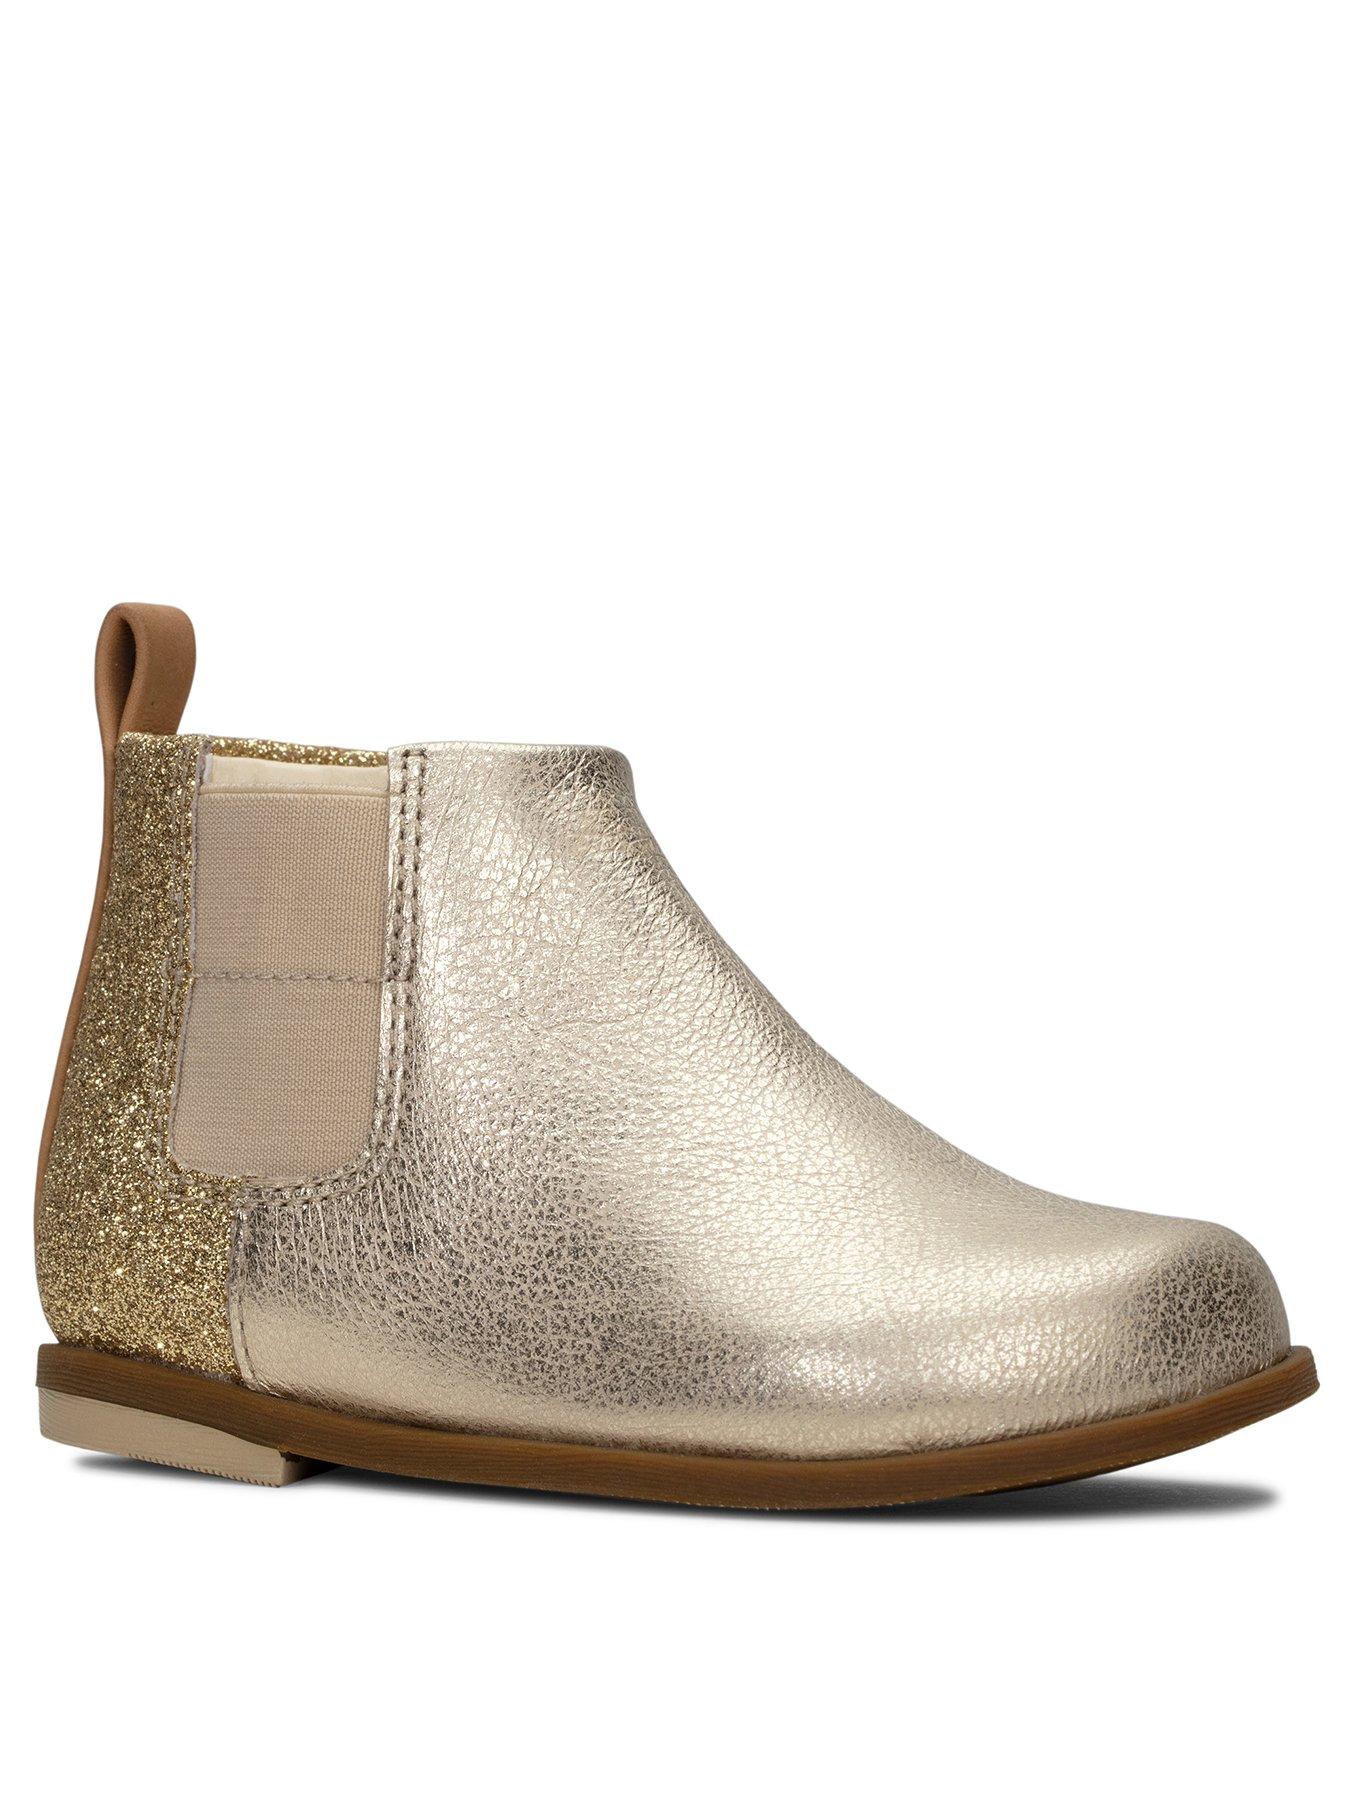 clarks gold boots 